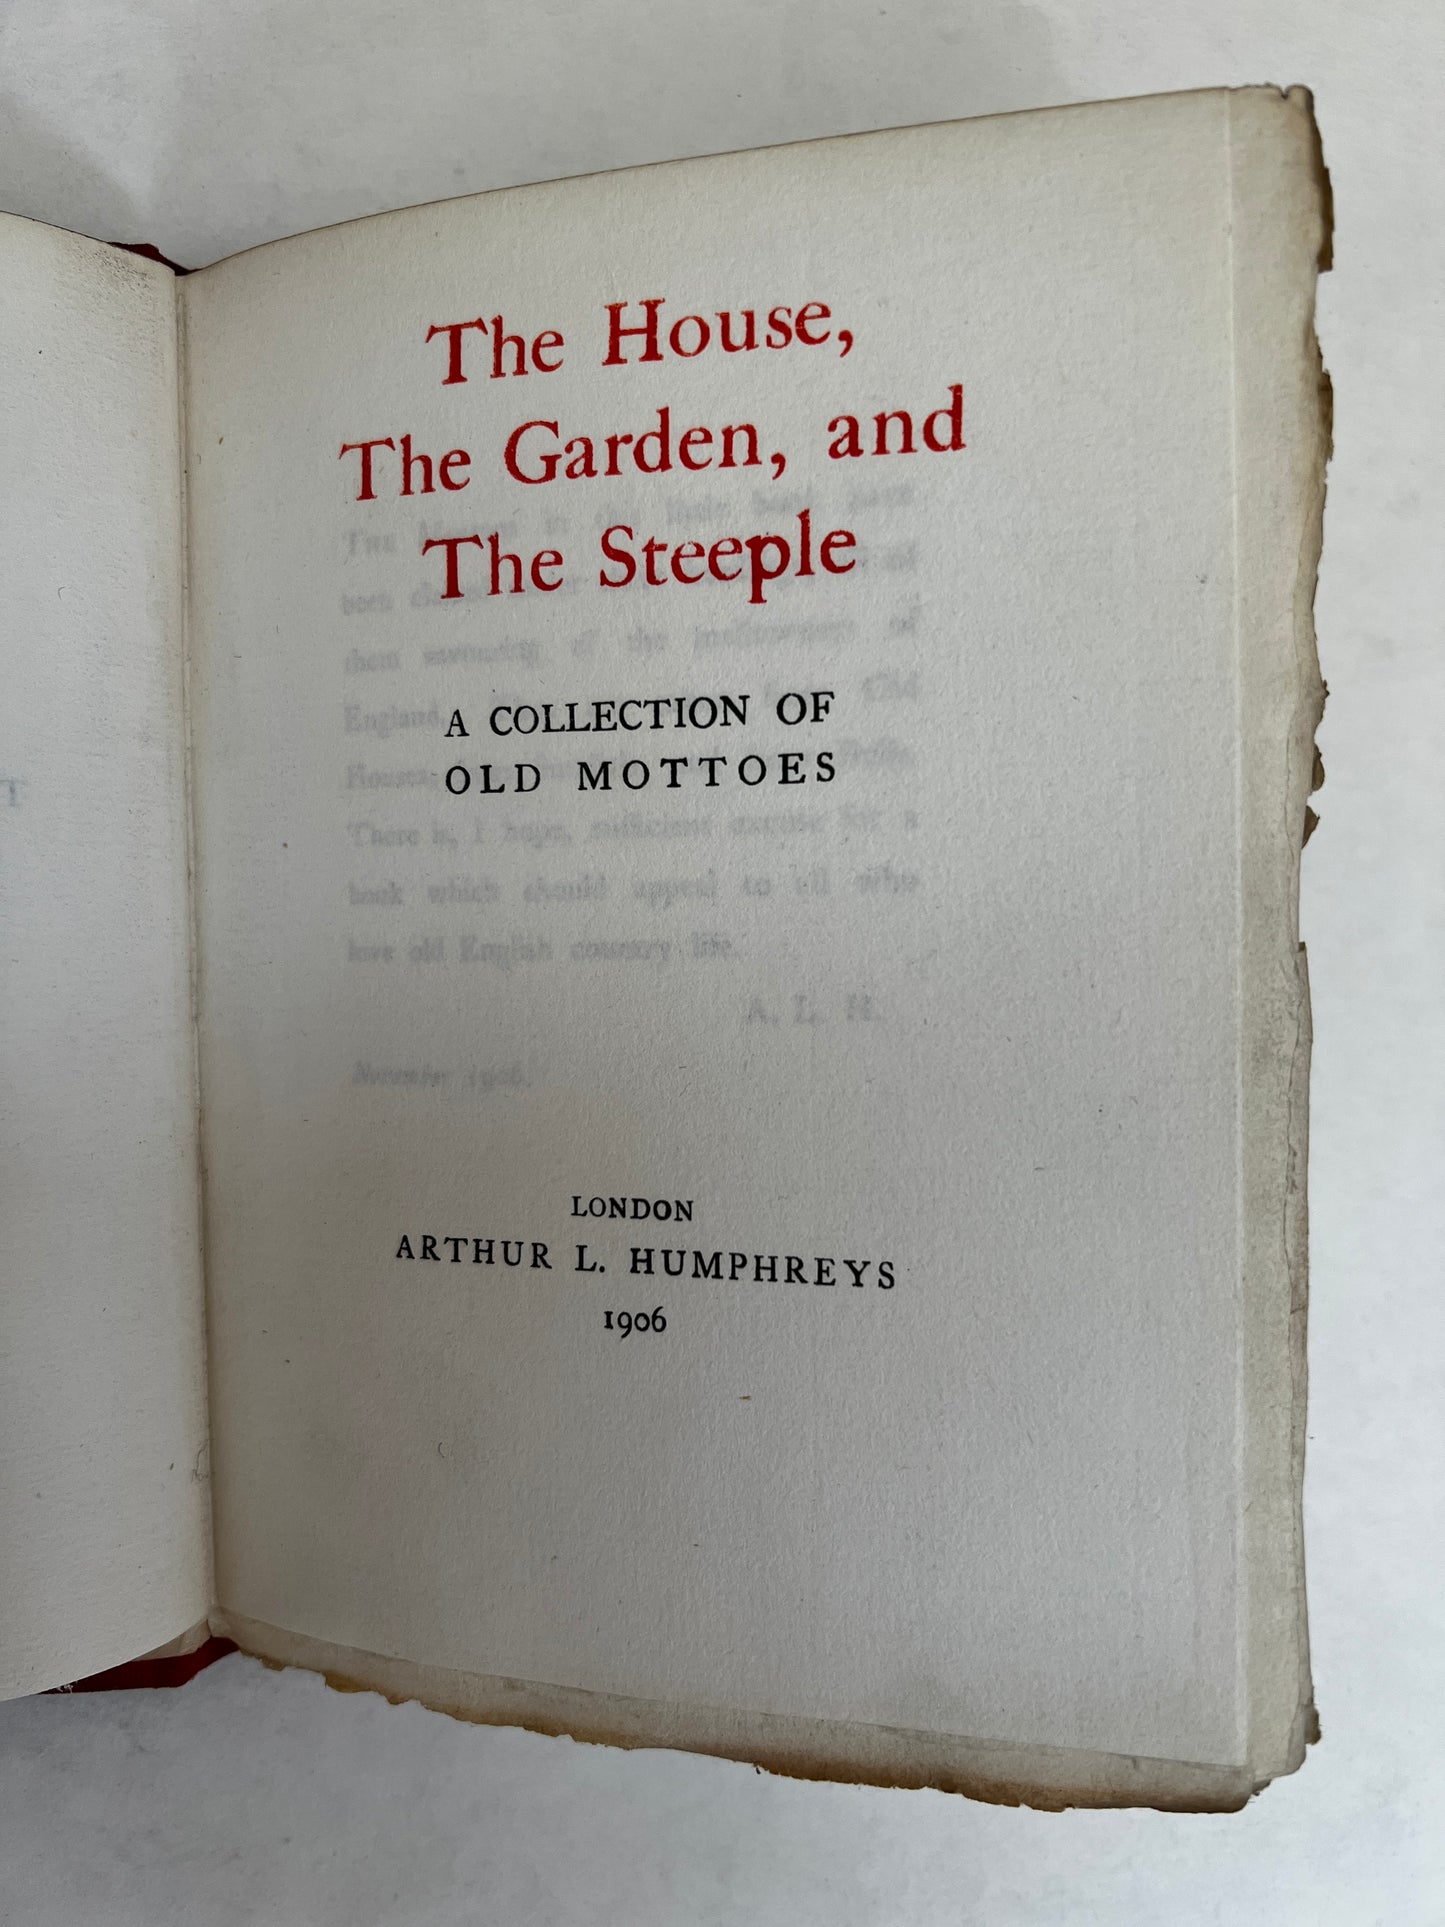 The House, the Garden, and the Steeple: A Collection of Old Mottoes